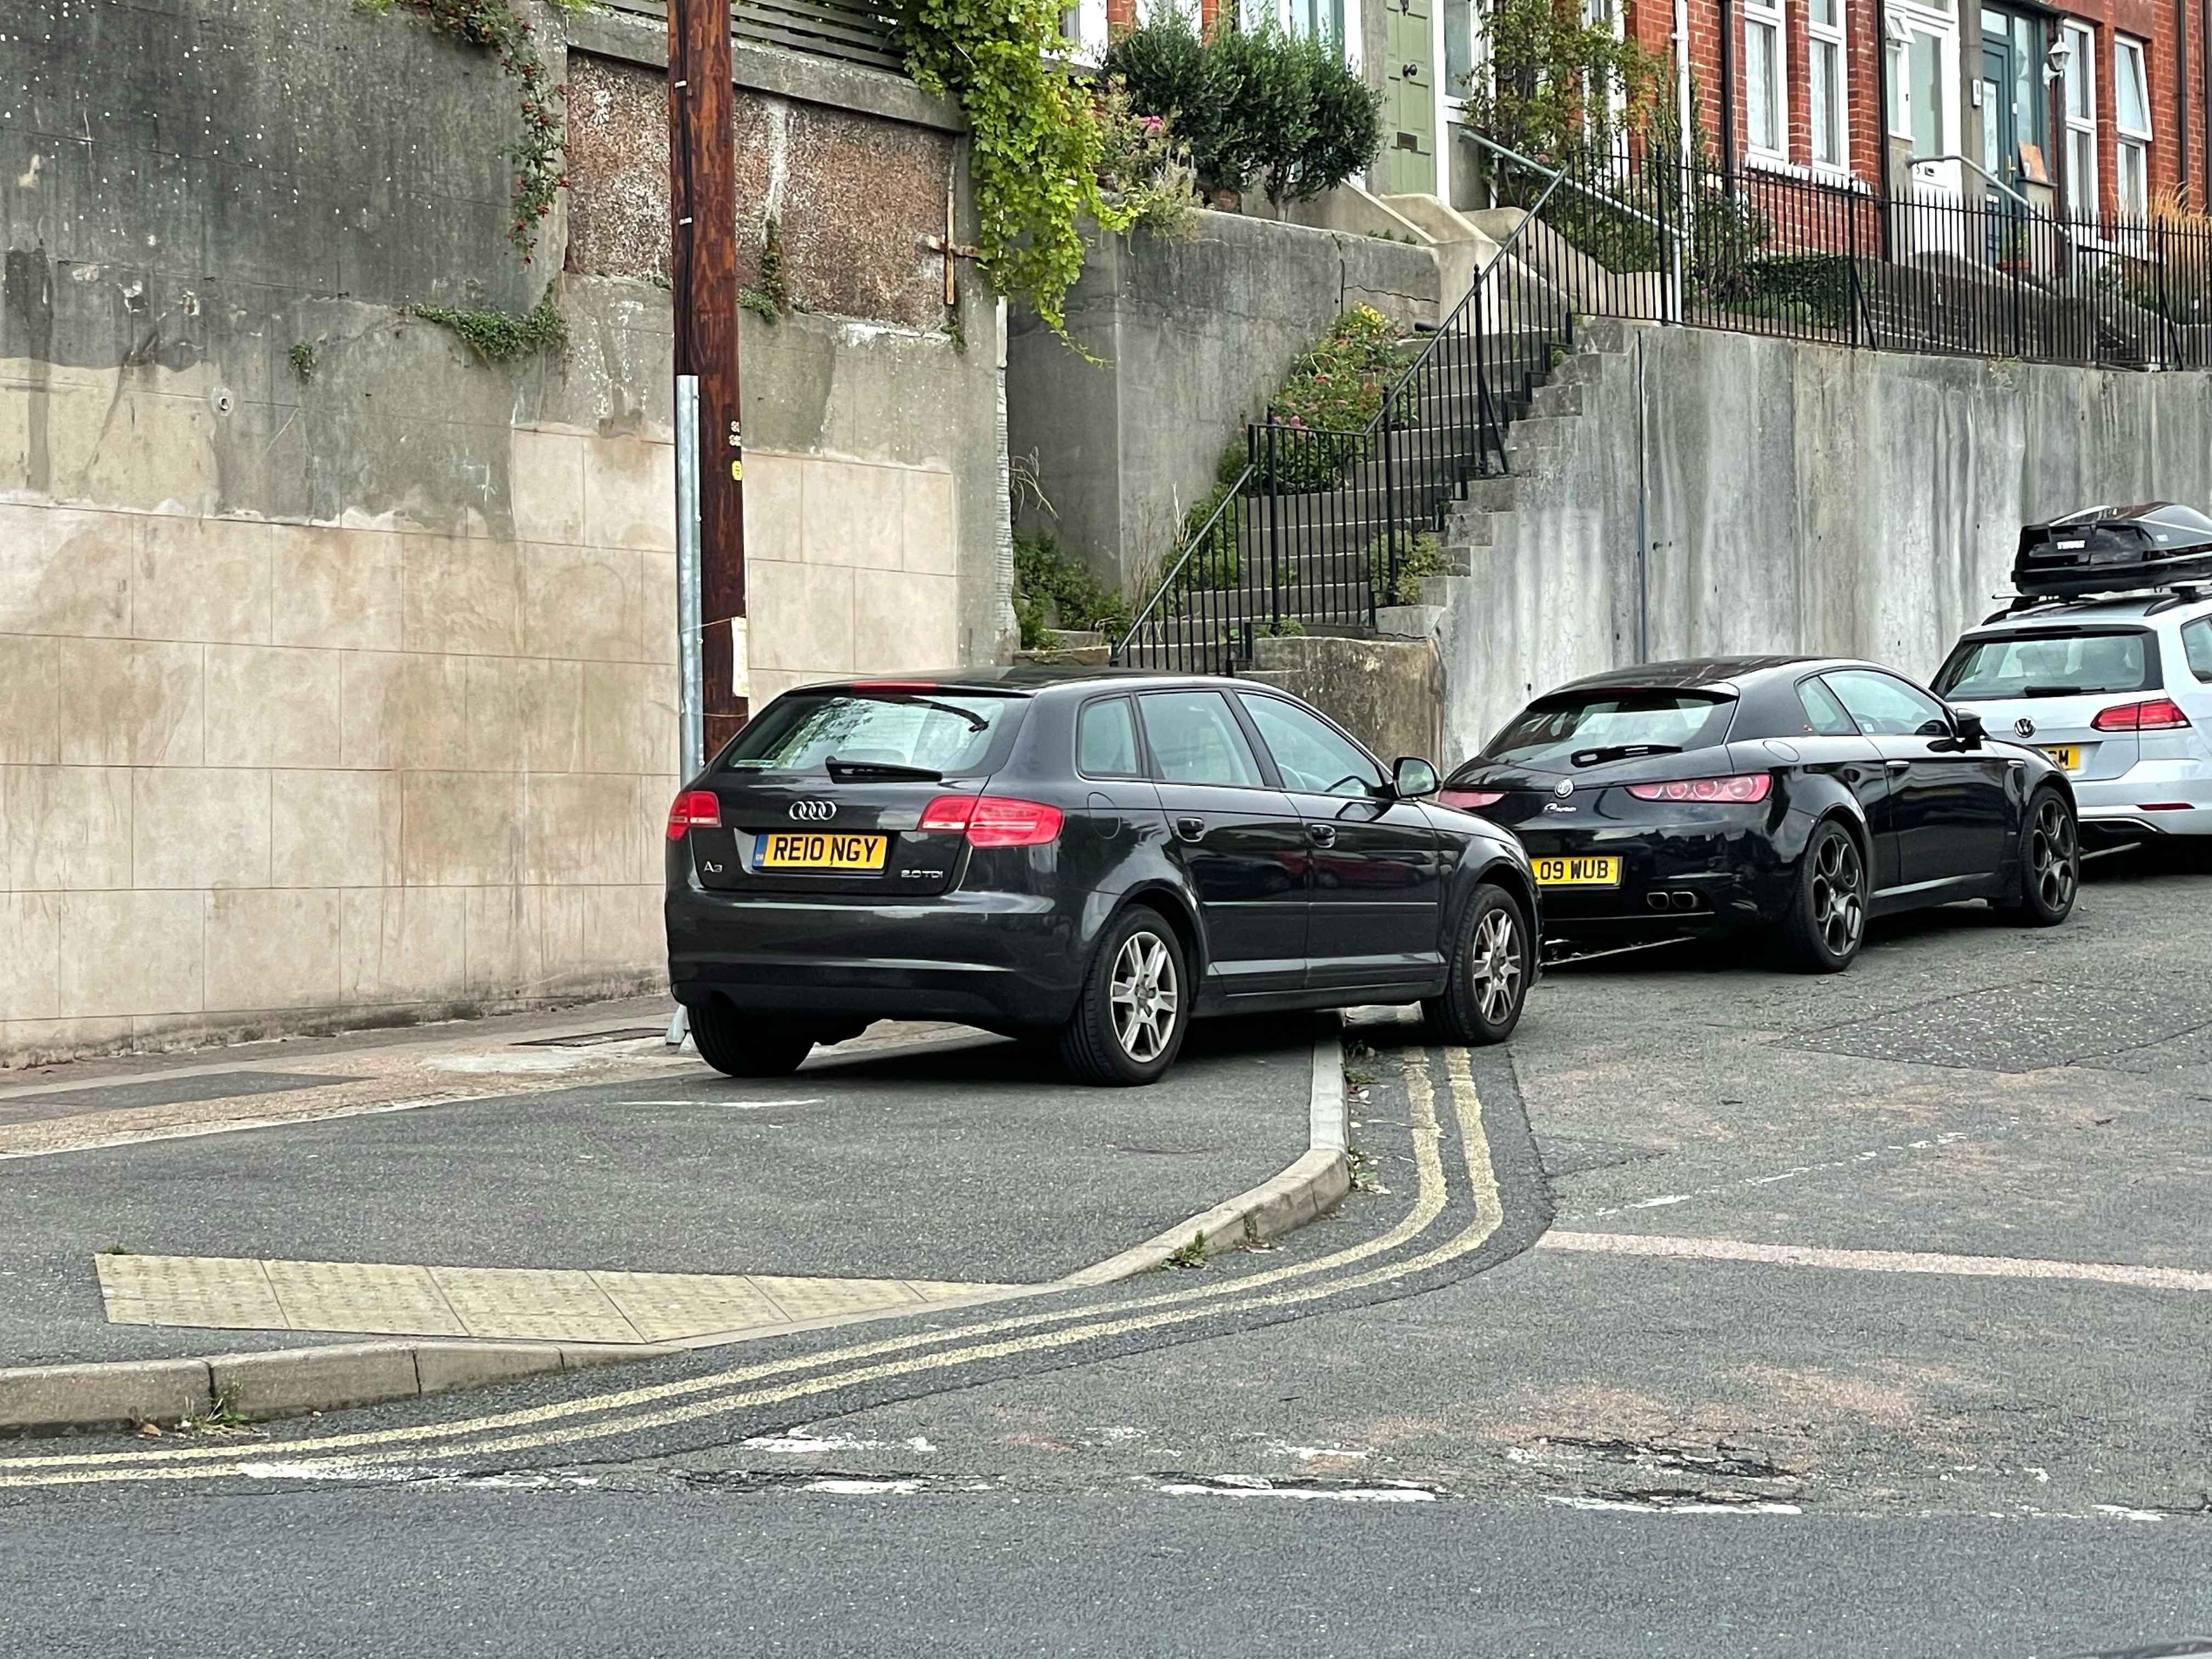 Photograph of SL09 WUB - a Black Alfa Romeo Brera parked in Hollingdean by a non-resident. The third of twenty photographs supplied by the residents of Hollingdean.